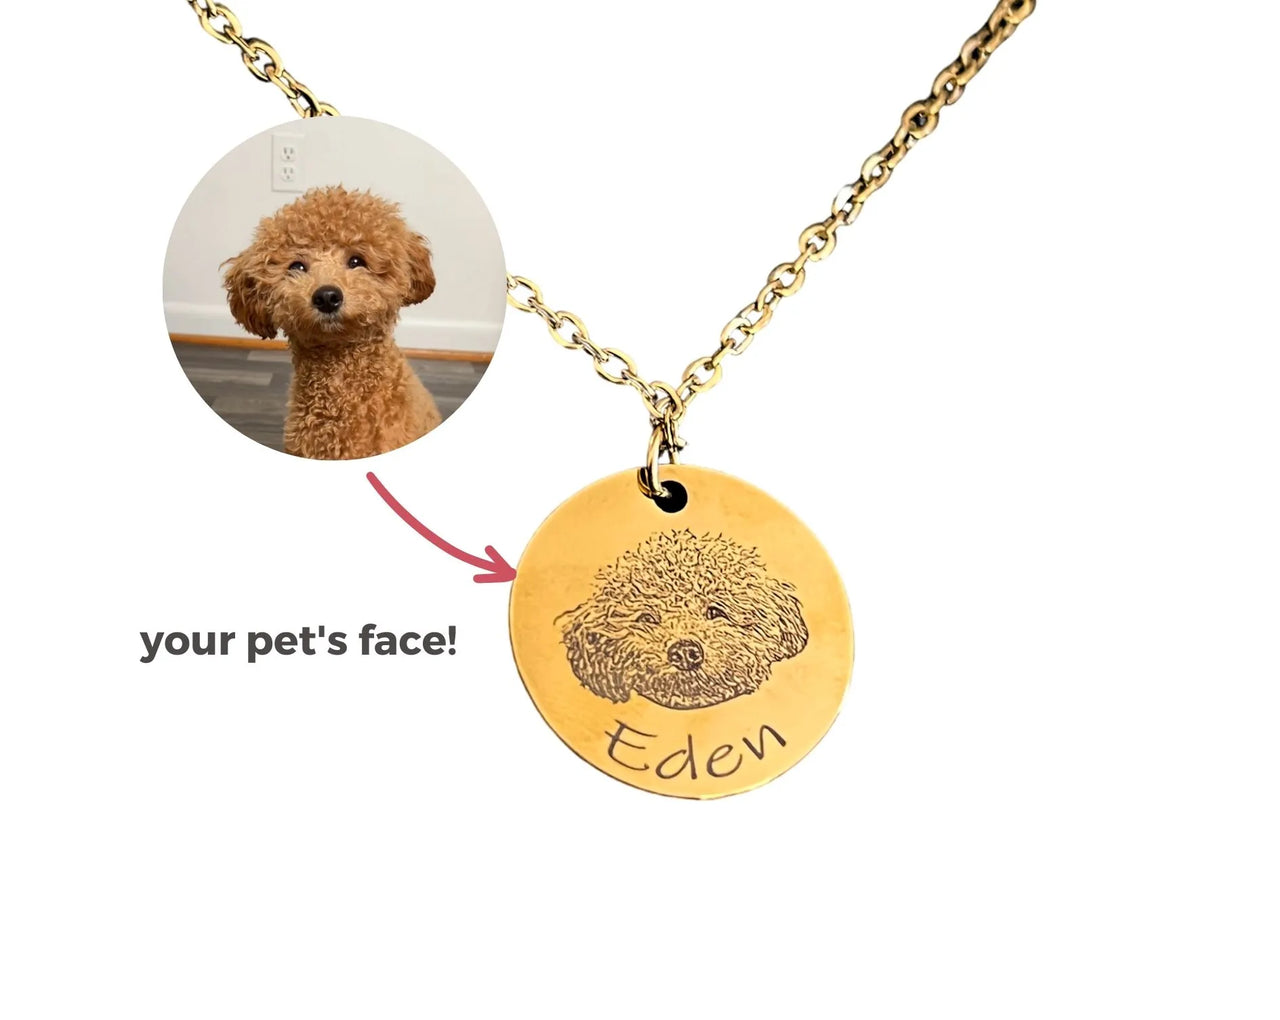 Personalized Pet Photo Necklace and Keychain from Black Diamonds New York